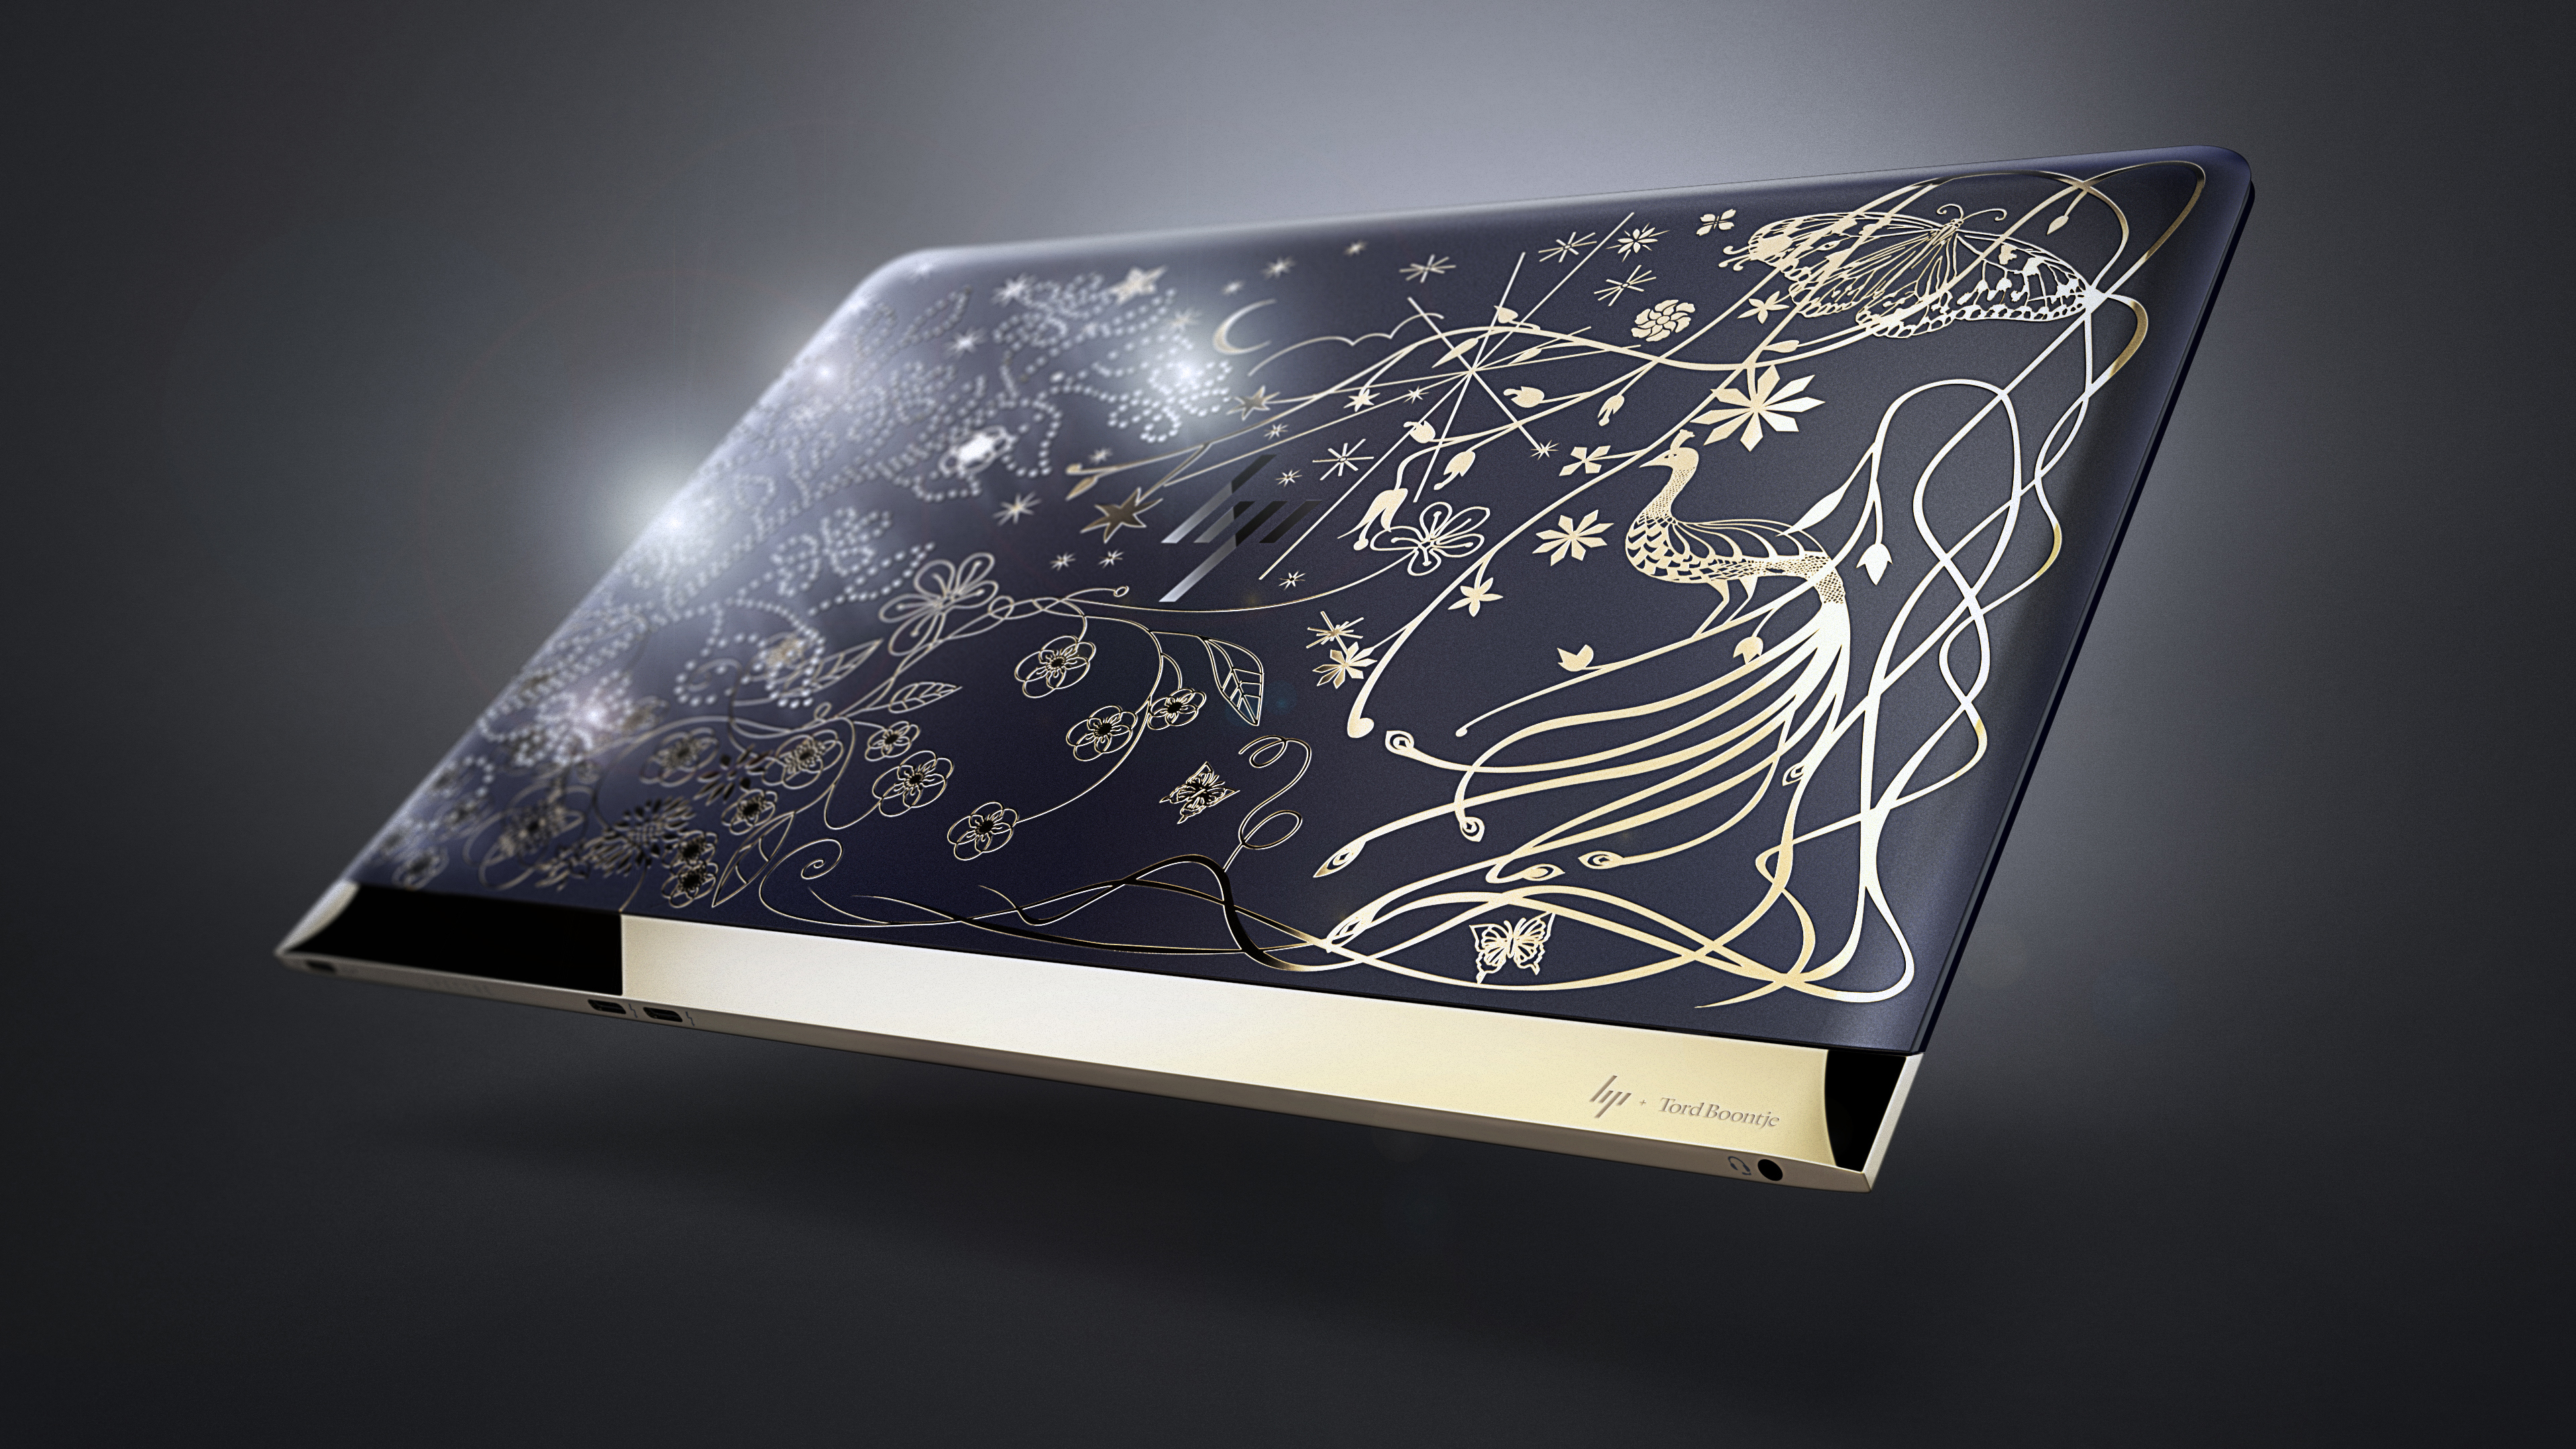 Crystals and Gold for HP's Spectre laptop